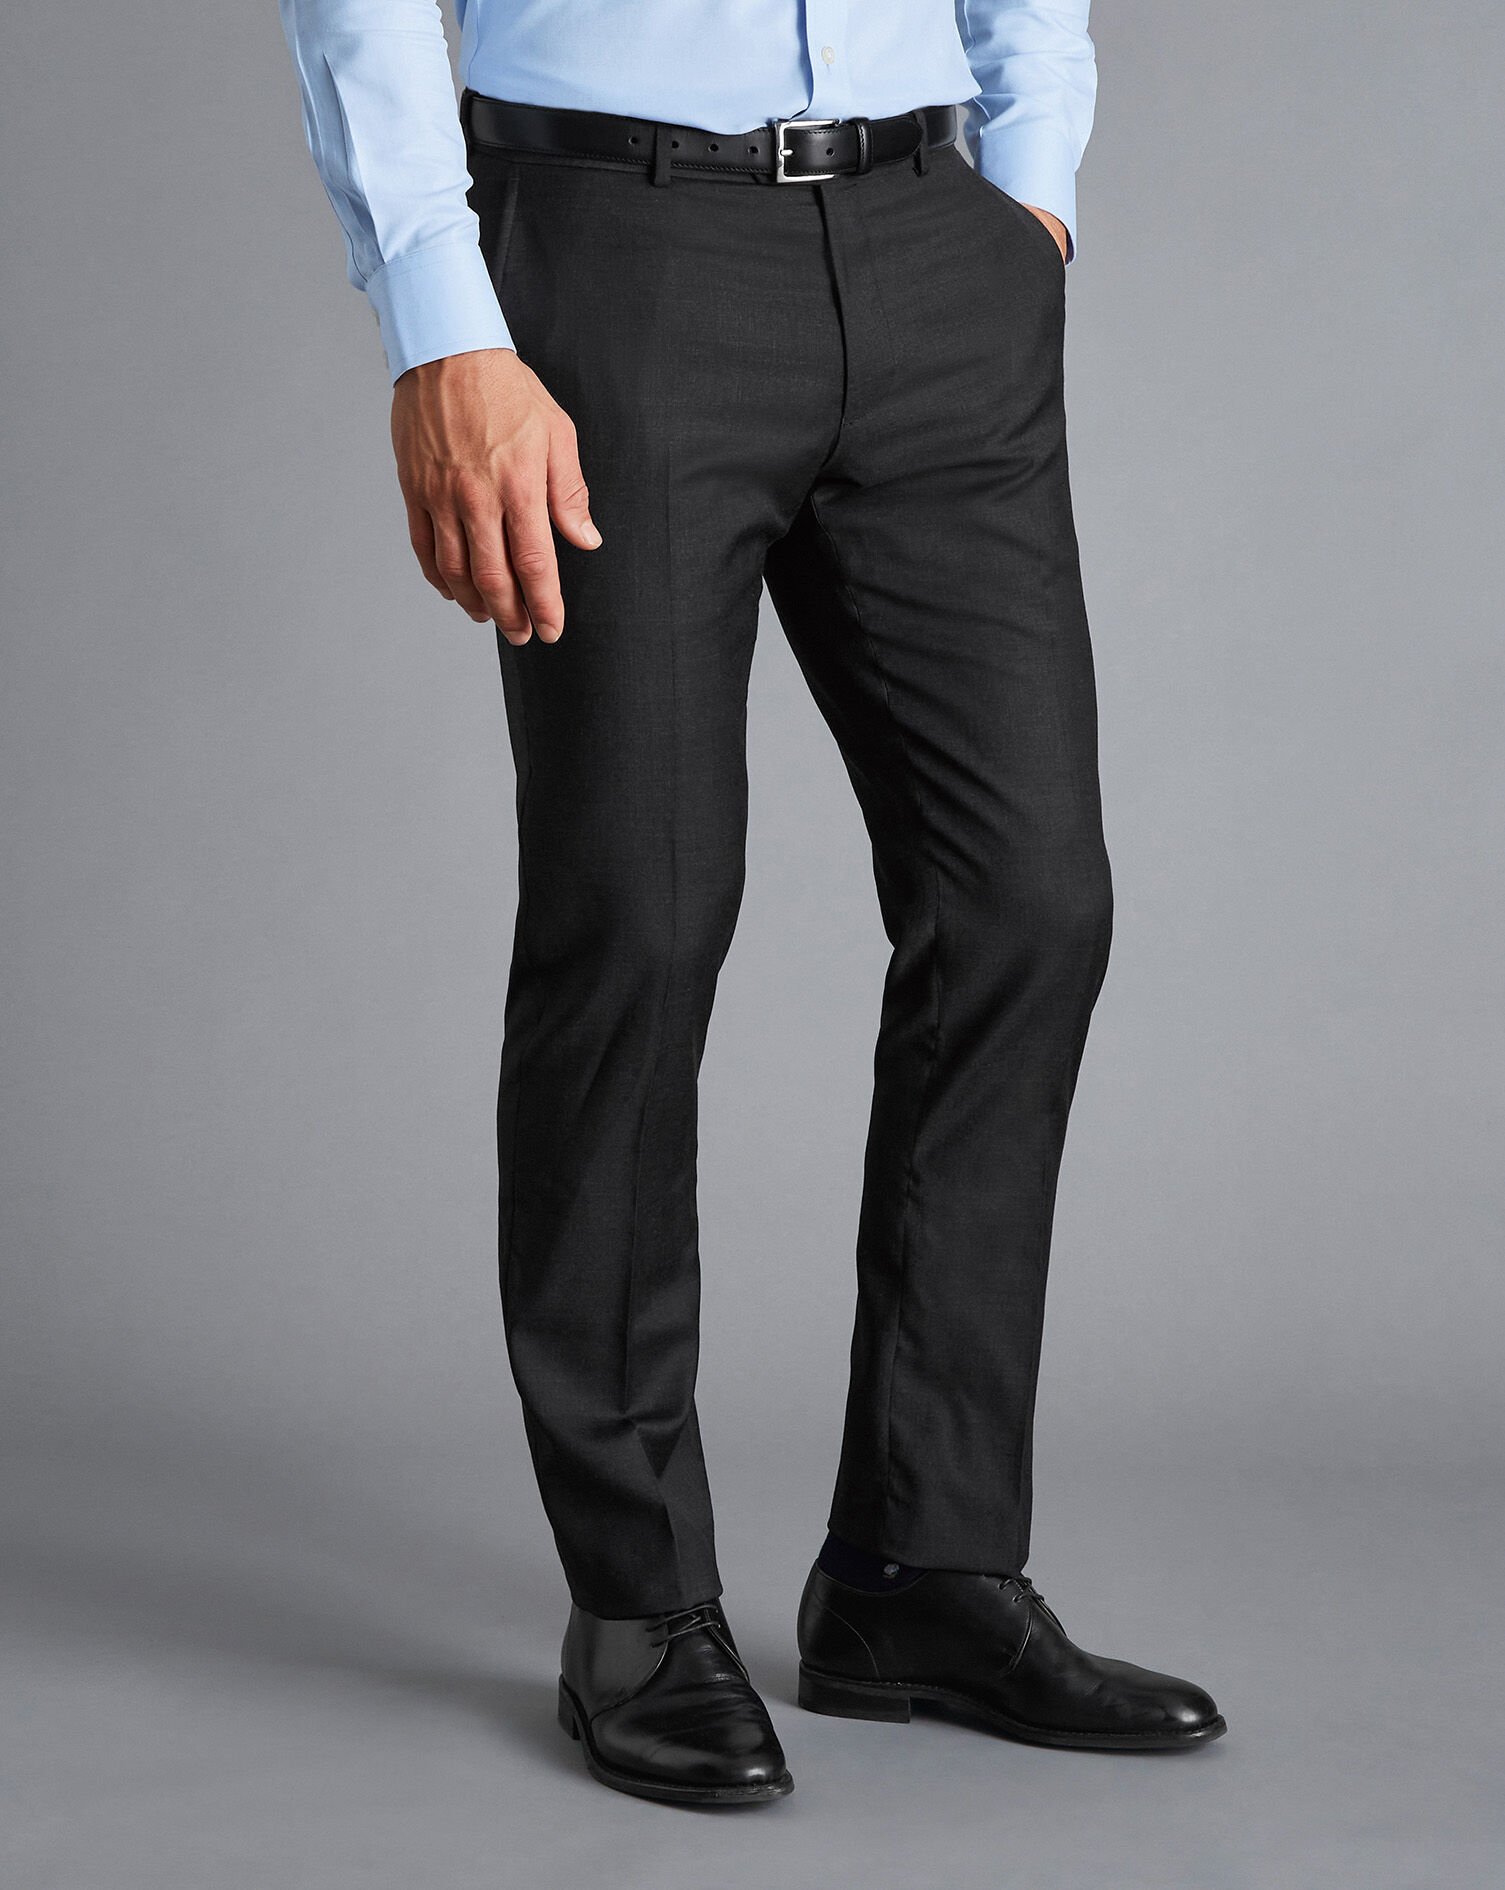 Black Dress Pants with Grey Shirt Outfits For Men (21 ideas & outfits) |  Lookastic